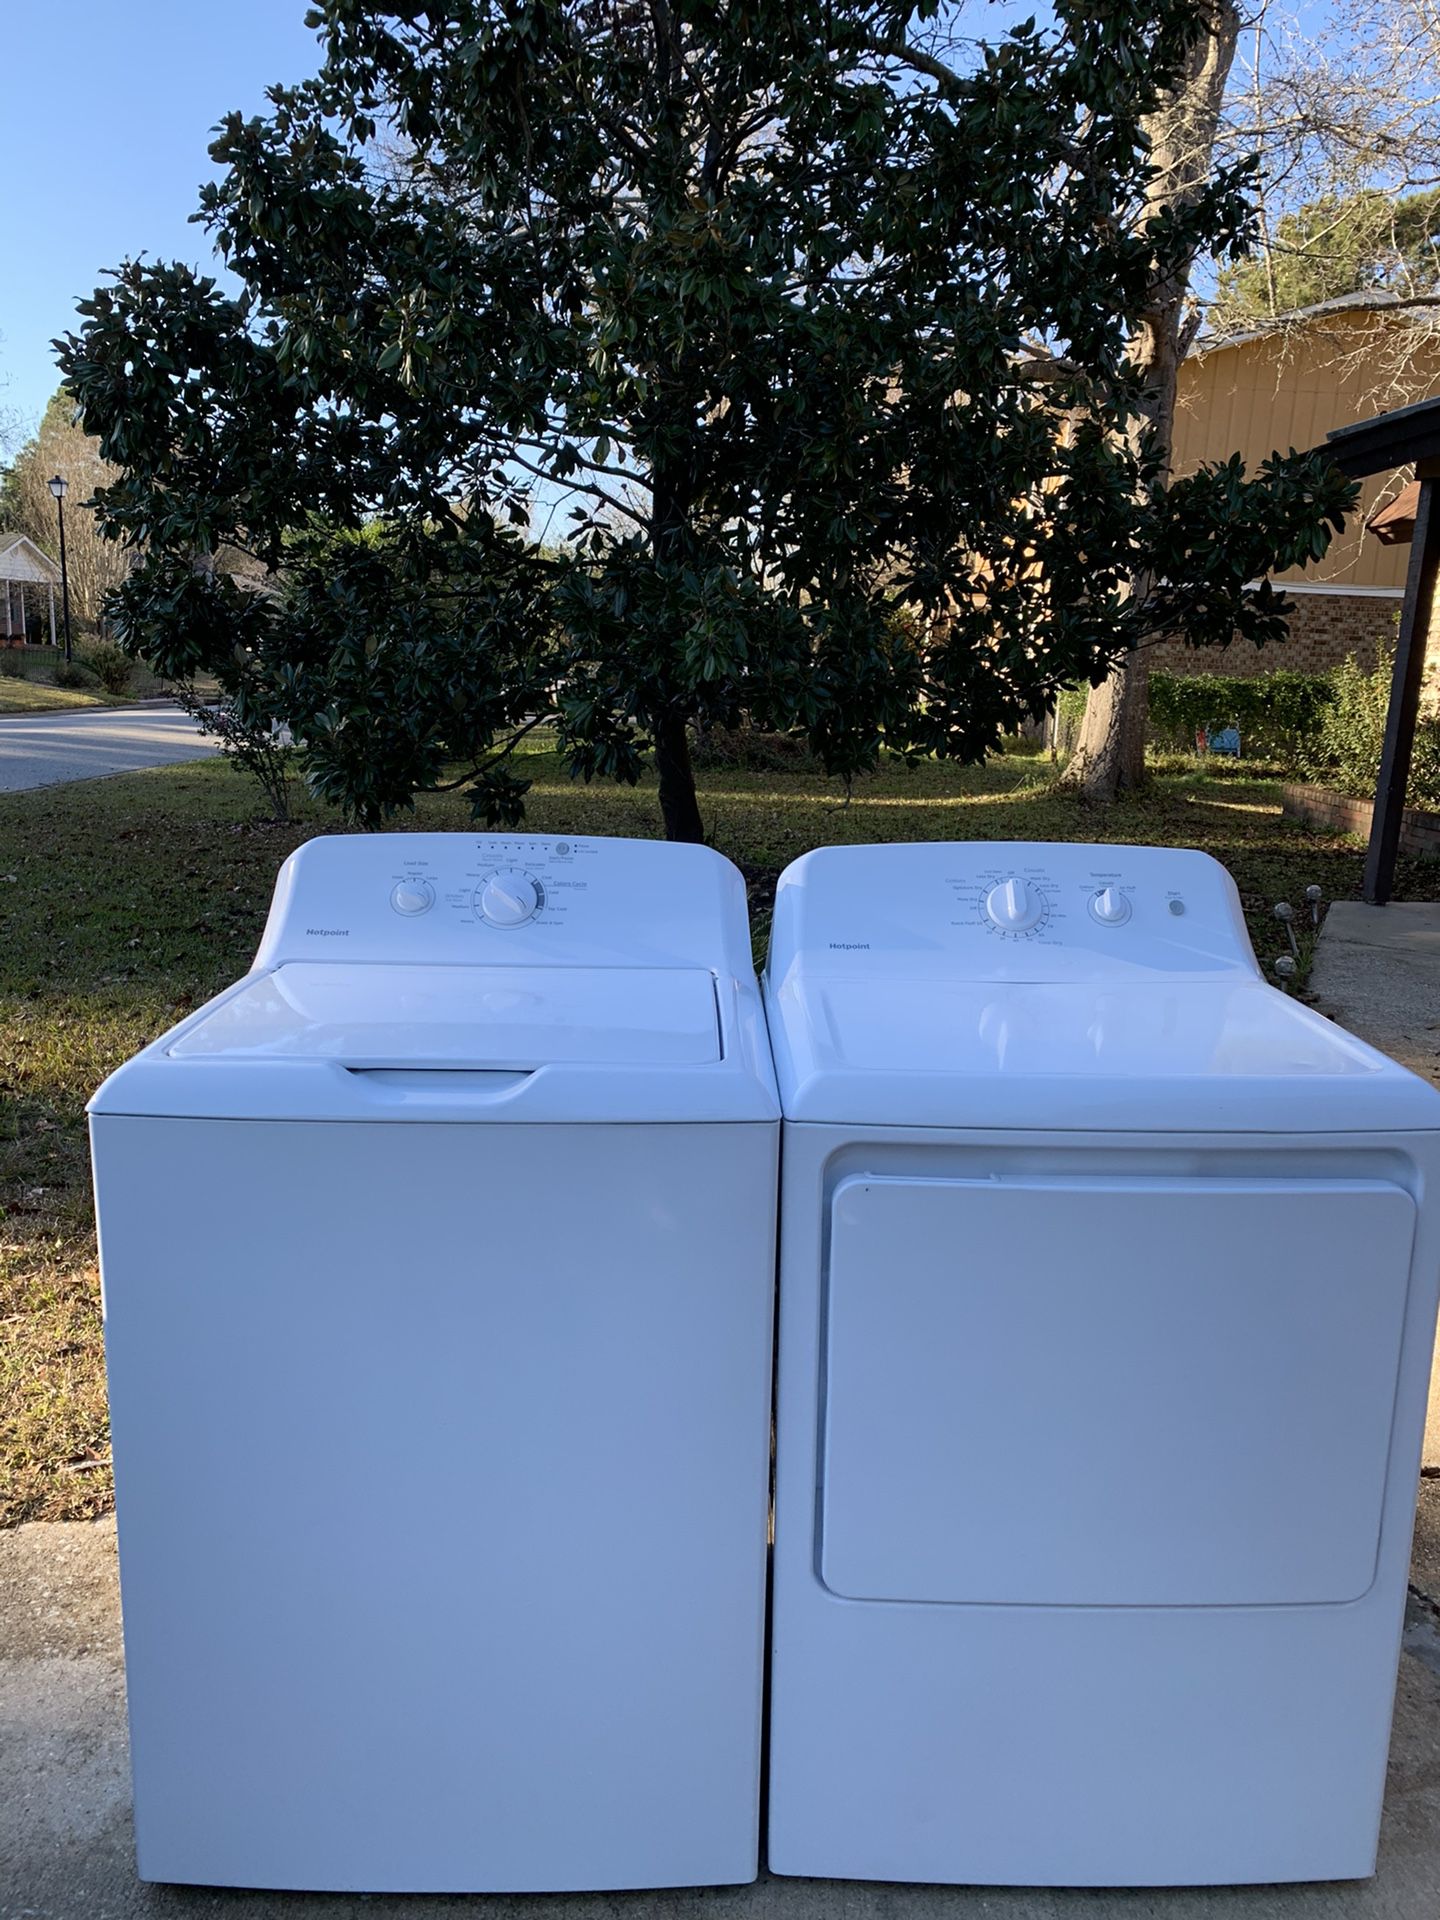 🌊Barely Used Matching Hotpoint Washer and Dryer Set Available🌊